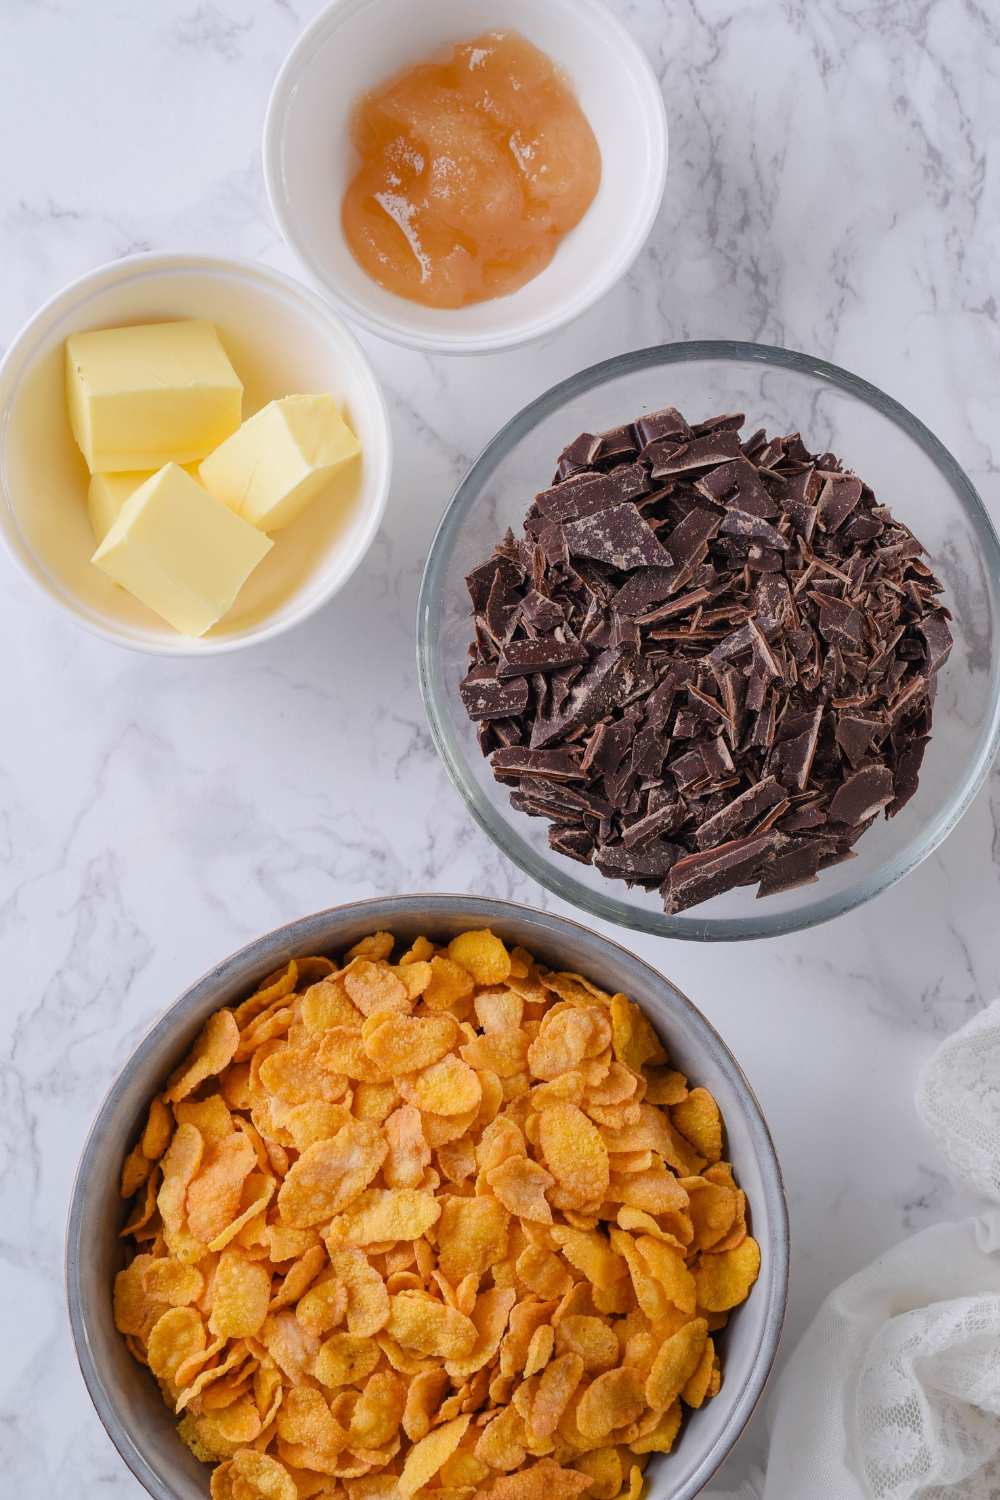 An overhead view of a bowl with cornflakes, chocolate chunks, butter, and honey.